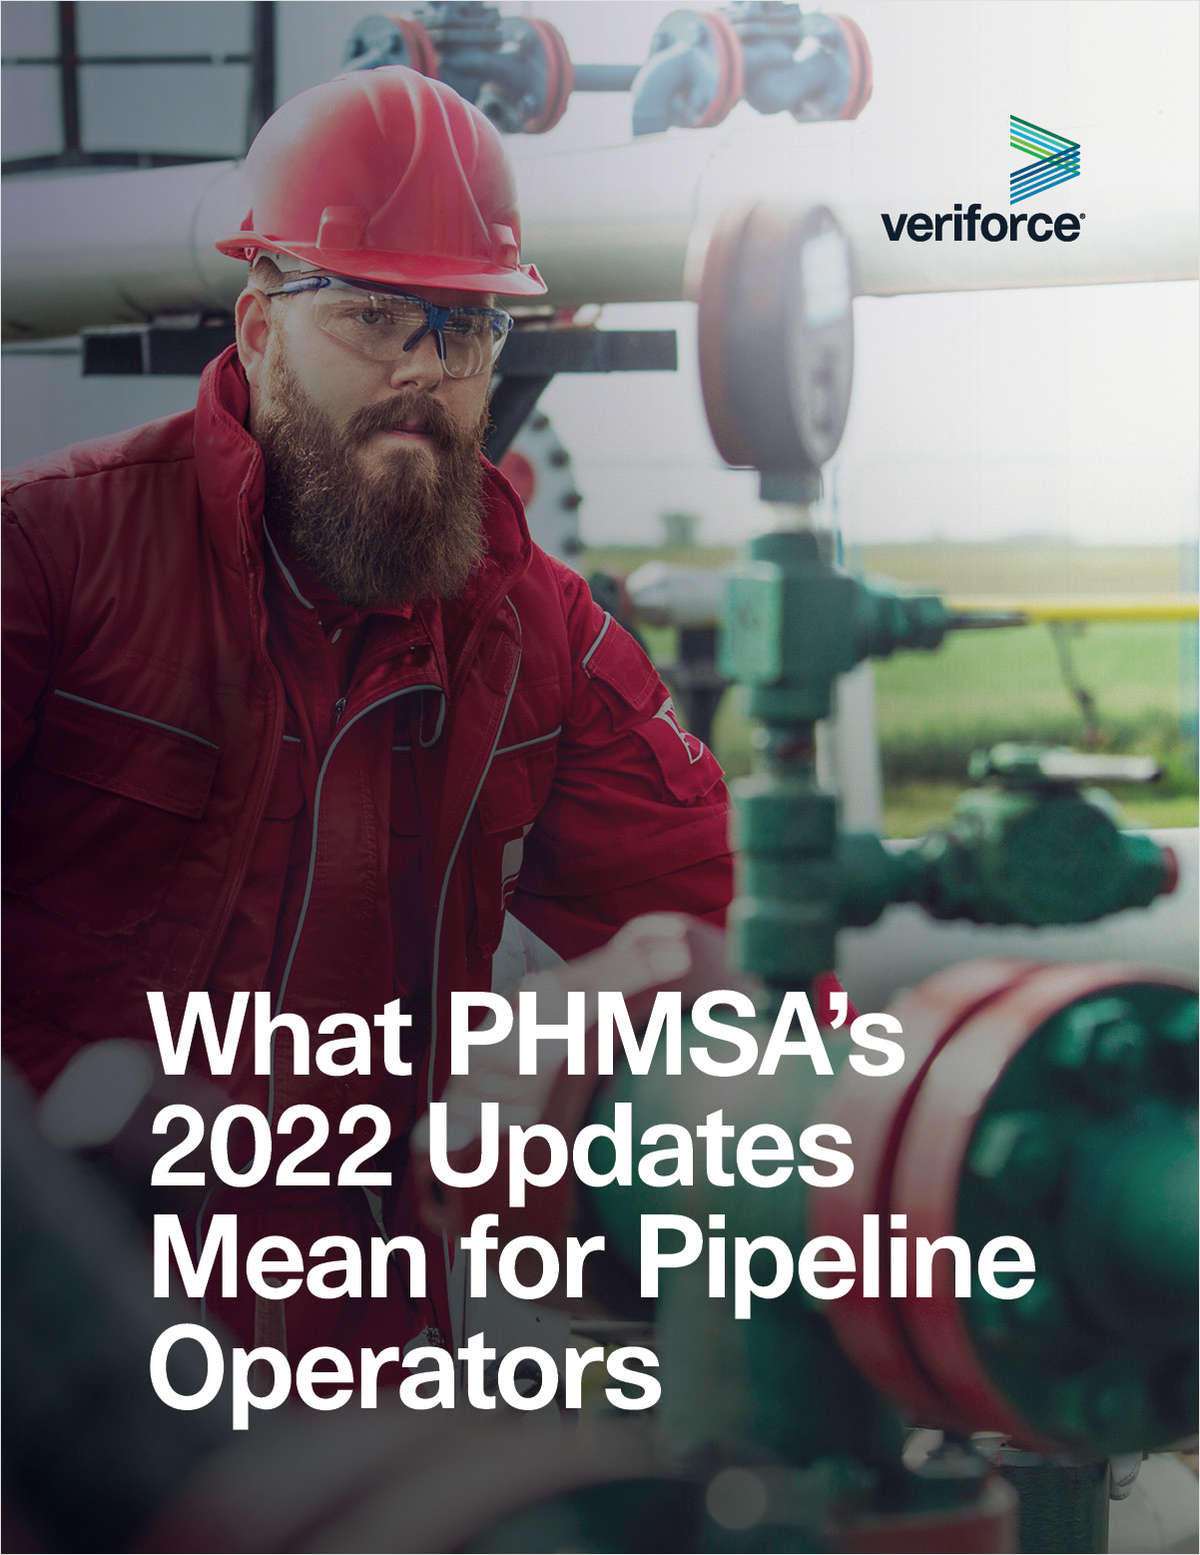 What PHMSA's 2022 Updates Mean for Pipeline Operators